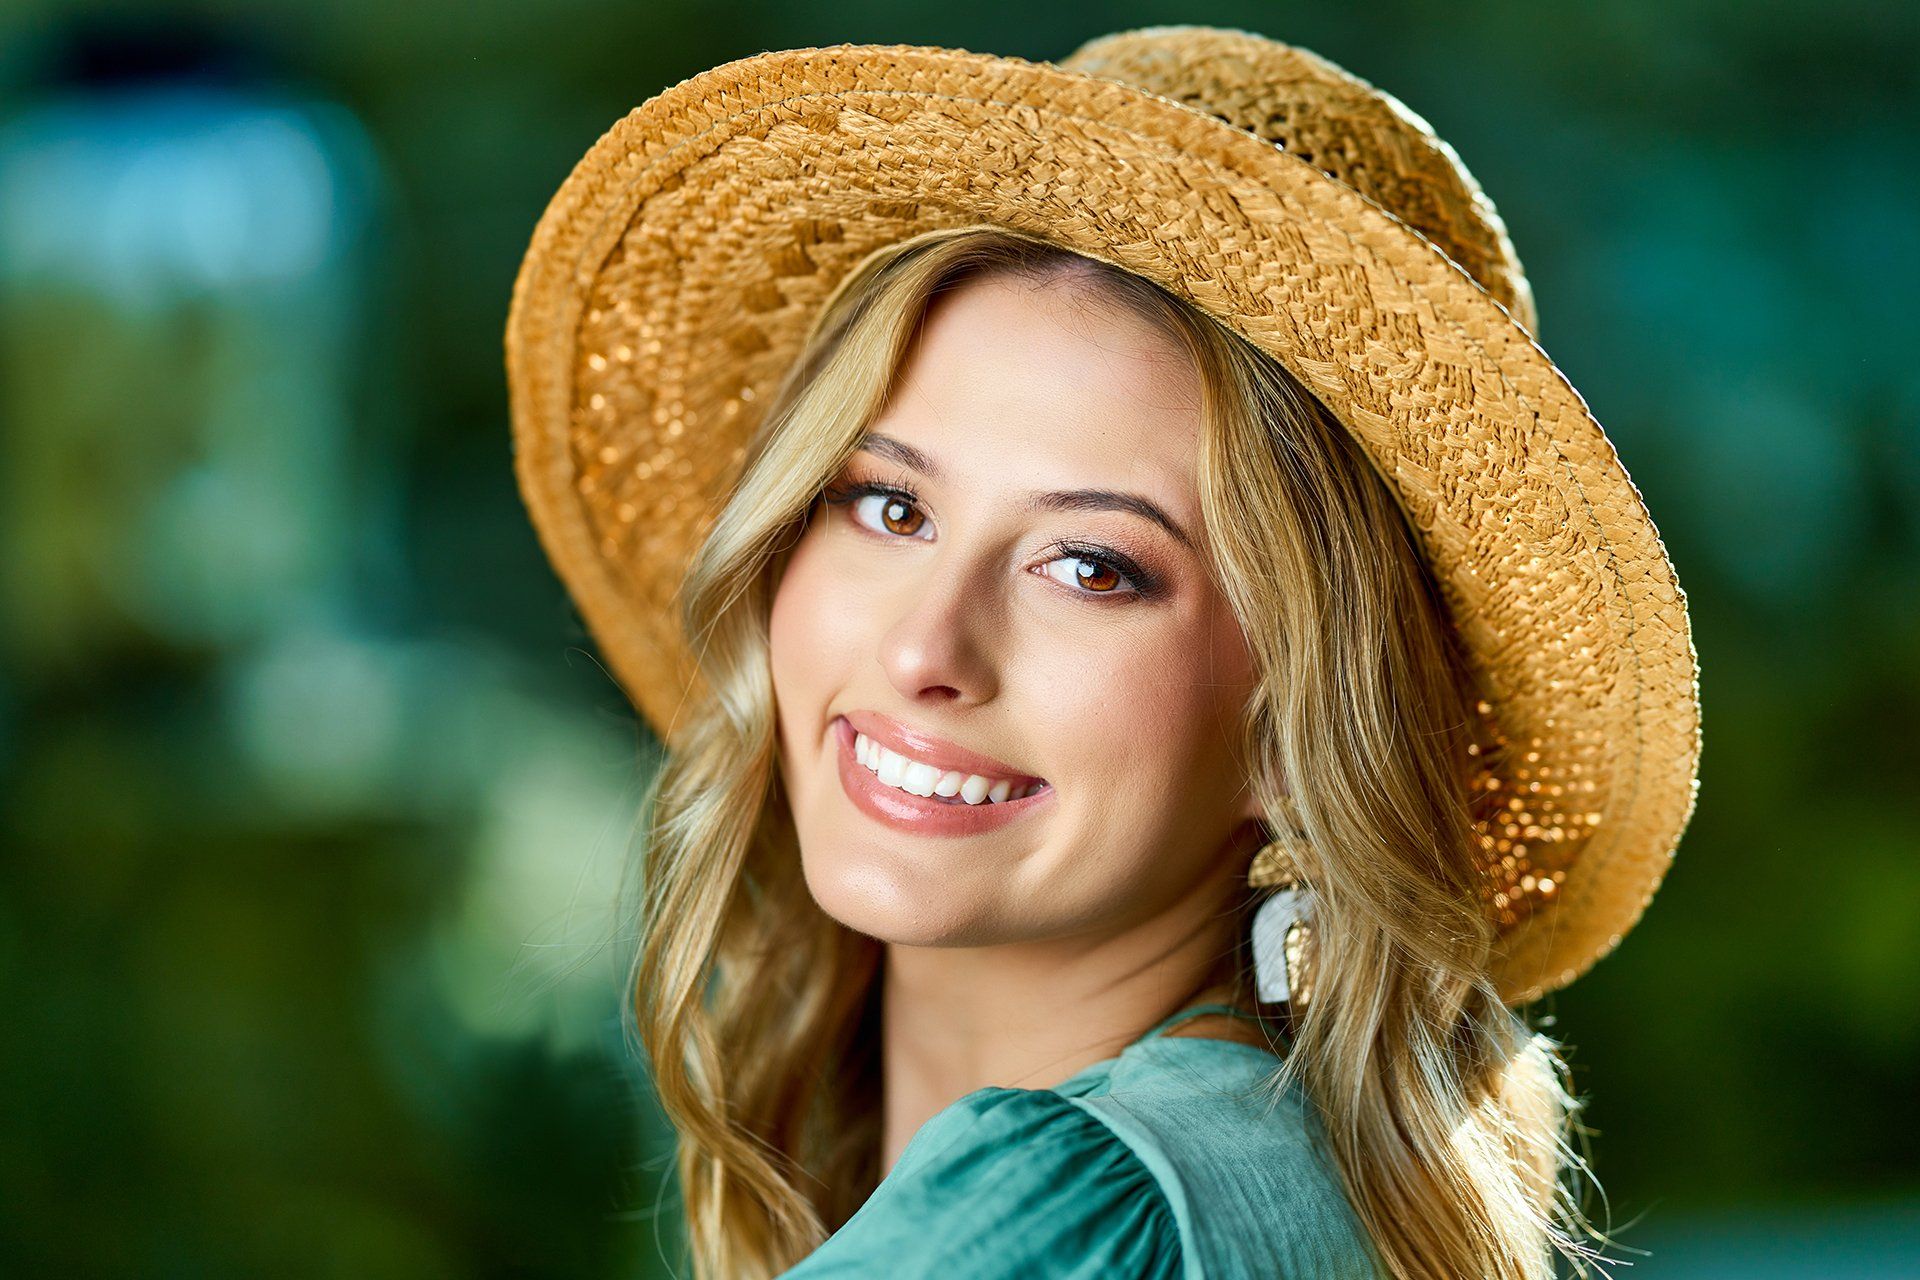 A woman wearing a straw hat and earrings is smiling for the camera.